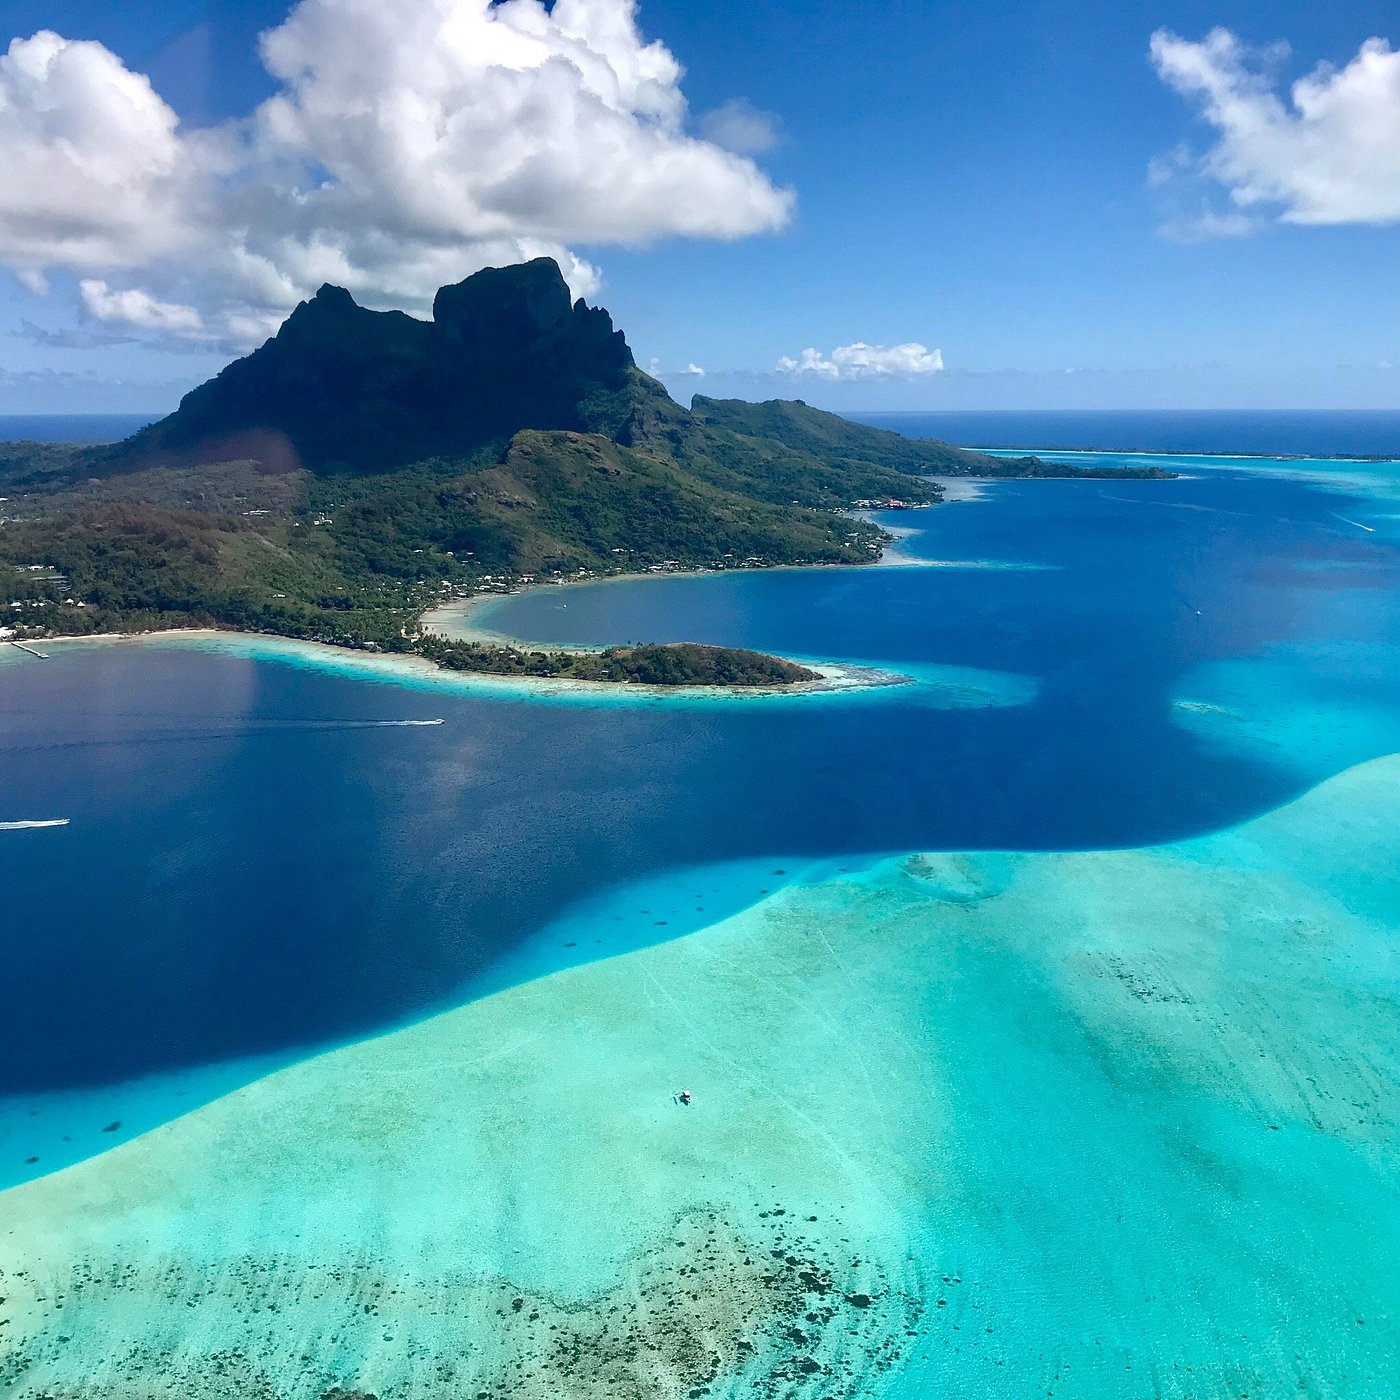 View on the highest point of Huahine Island